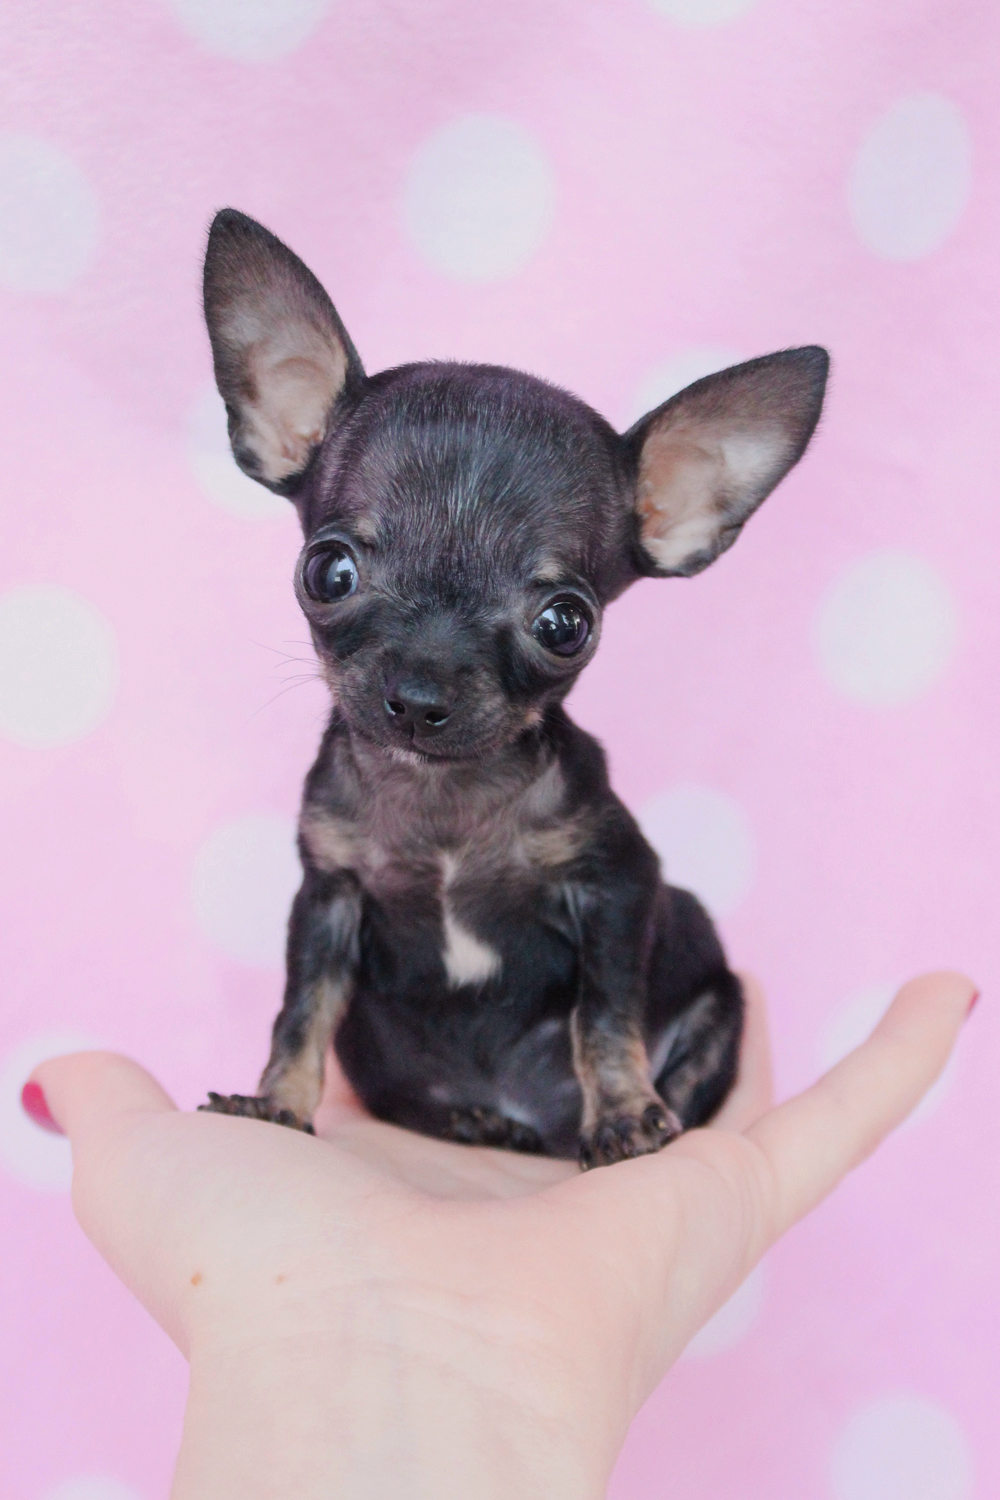 Tiny Teacup Chihuahua Puppies For Sale in South Florida | Teacups, Puppies & Boutique